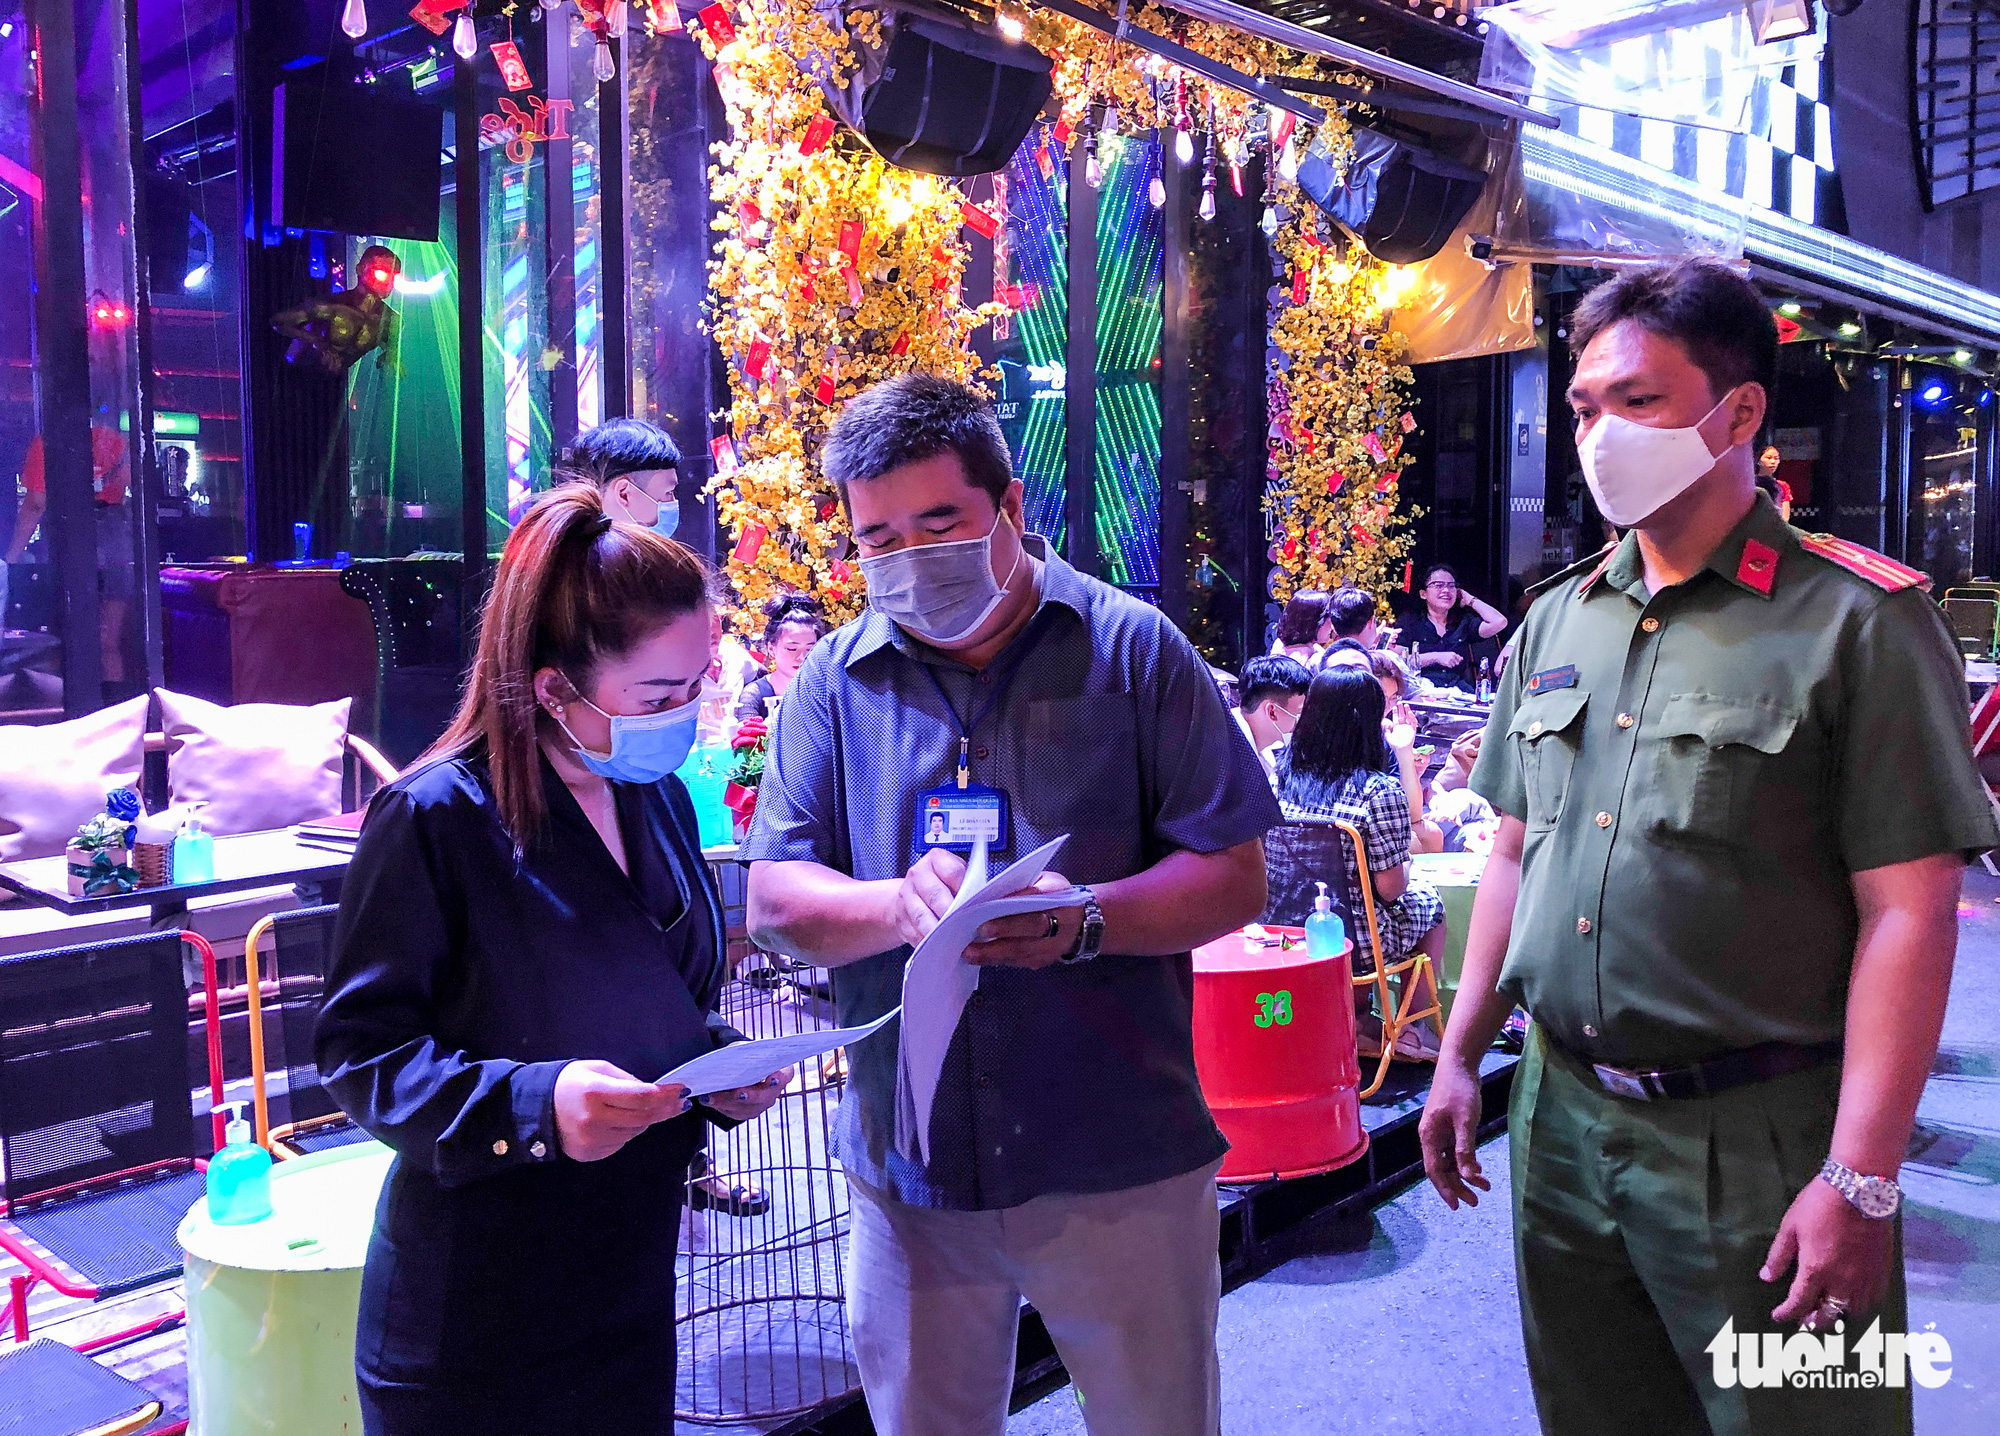 An official explains to a store owner the terms of a noise-reducing commitment during an inspection of businesses on Bui Vien Street in Ho Chi Minh City, Vietnam, March 20, 2021. Photo: Chau Tuan / Tuoi Tre